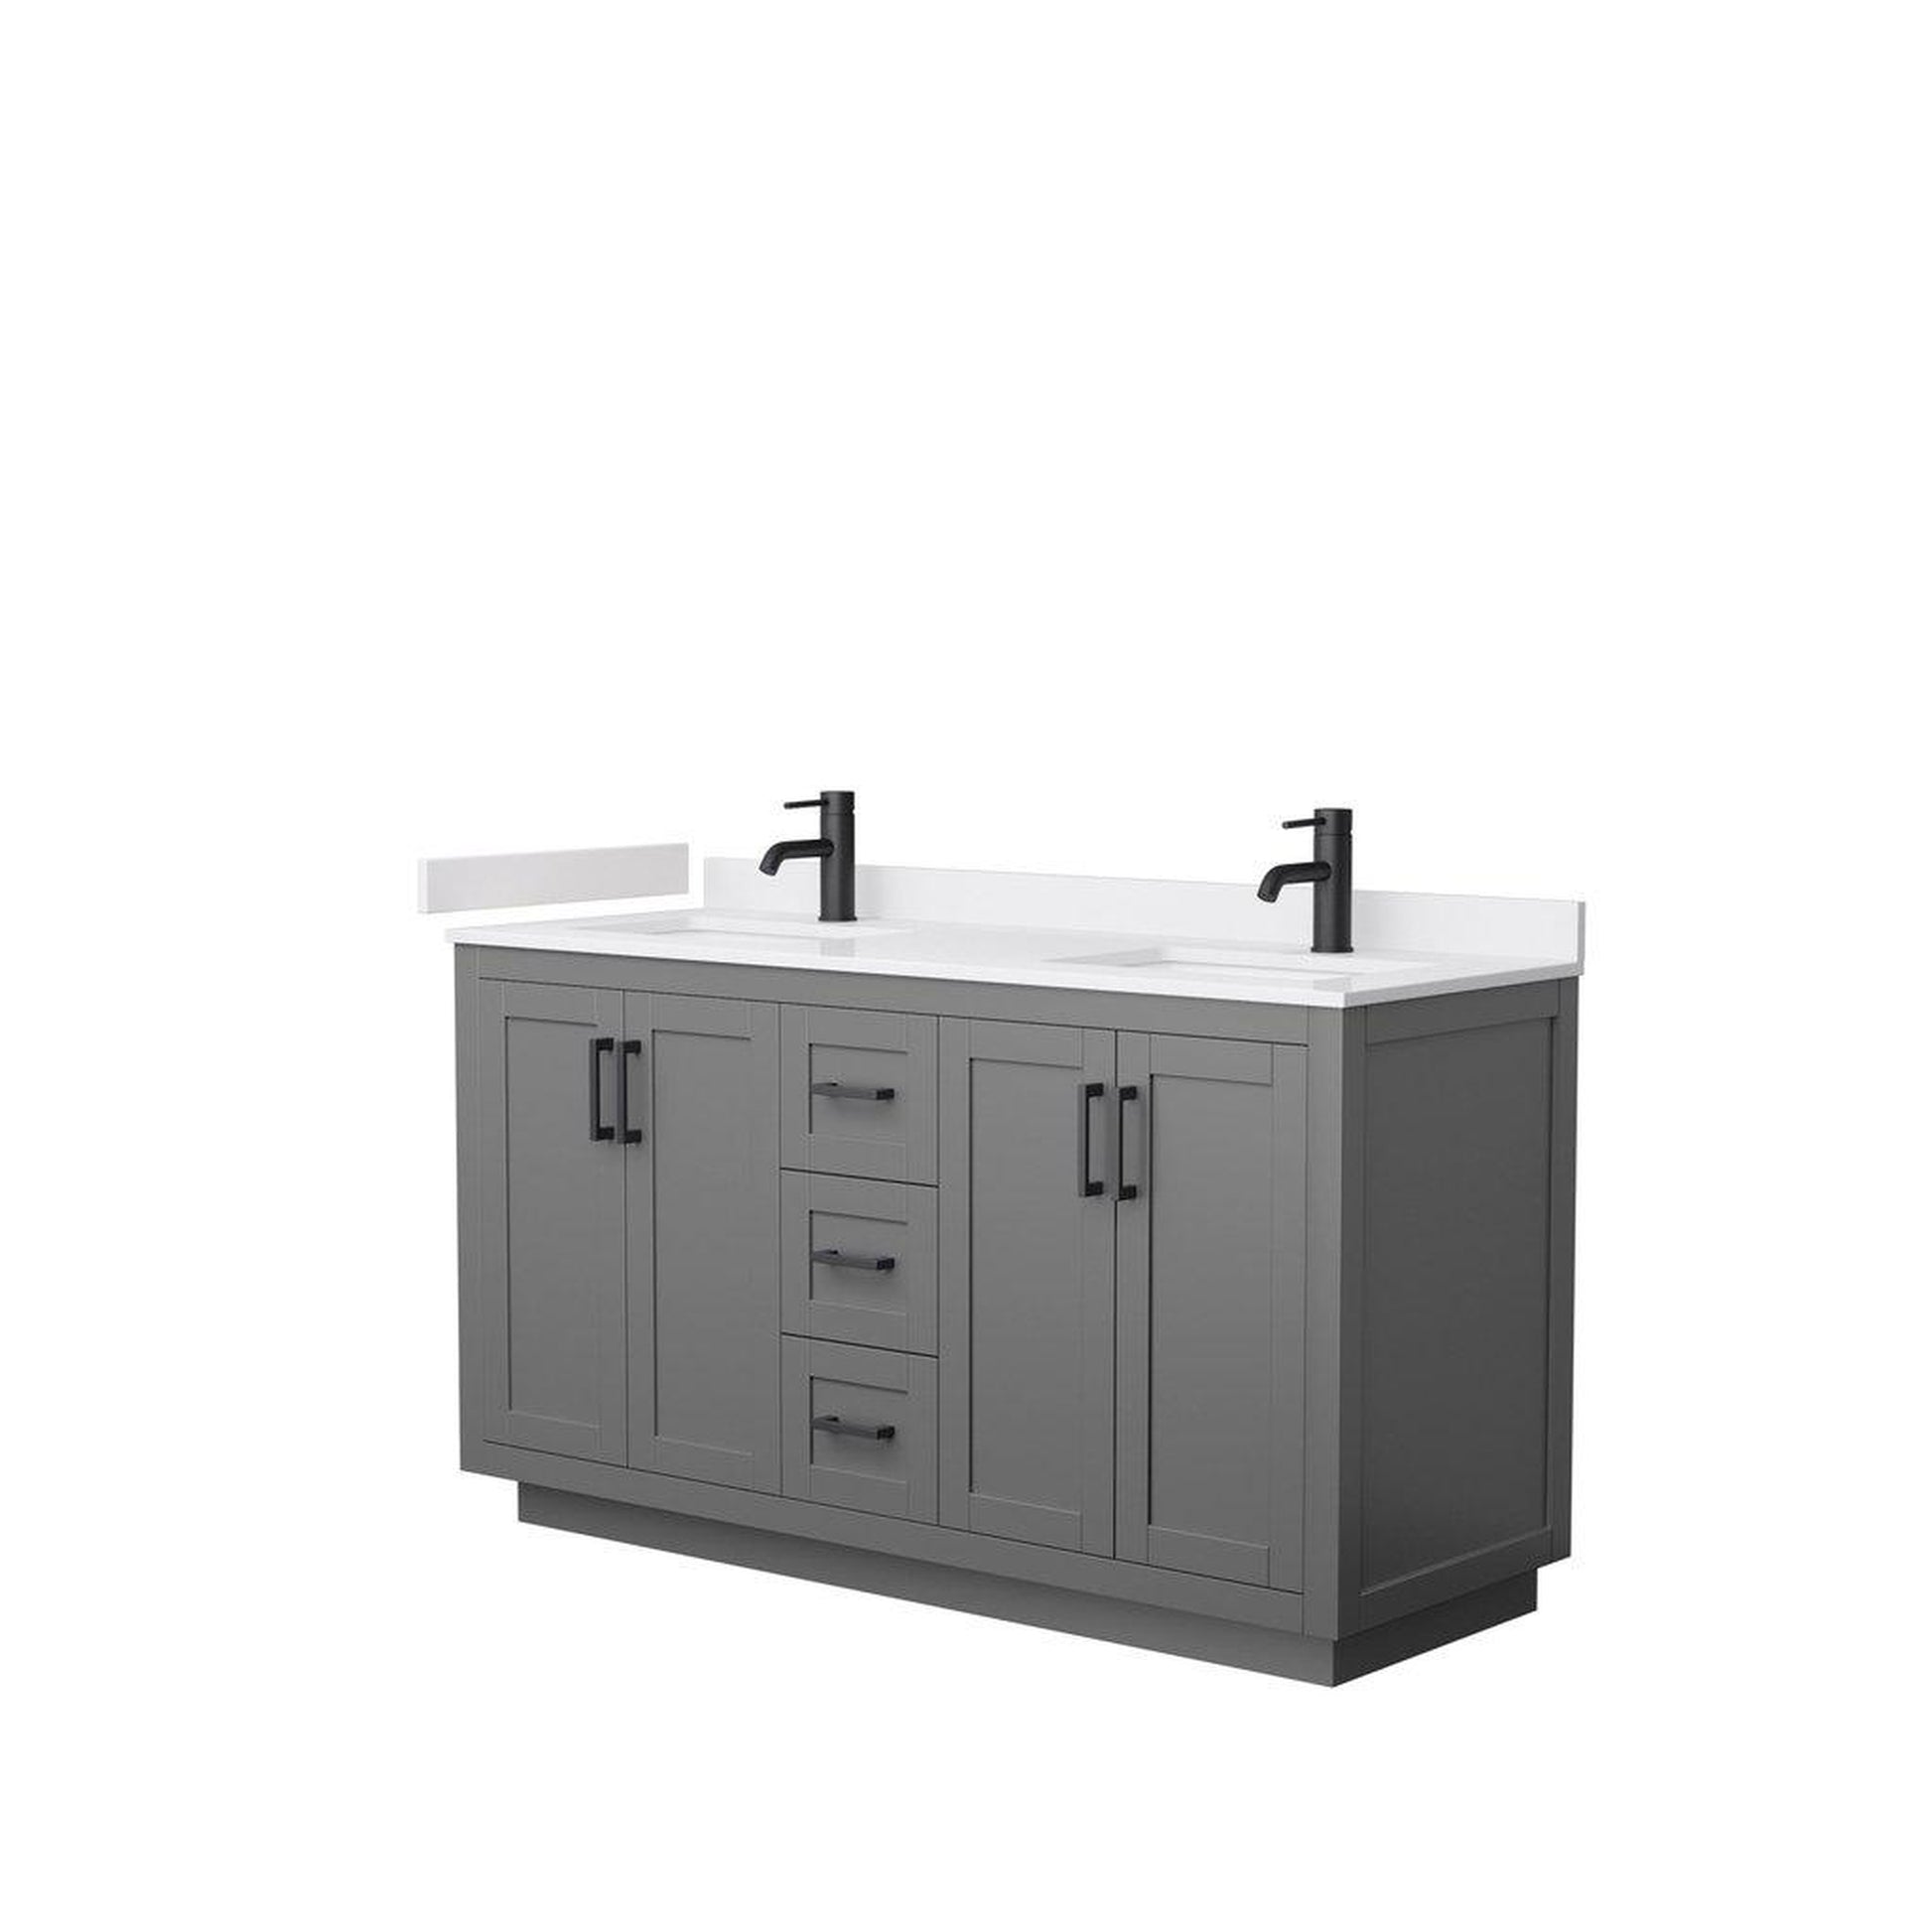 Wyndham Collection Miranda 60" Double Bathroom Dark Gray Vanity Set With White Cultured Marble Countertop, Undermount Square Sink, And Matte Black Trim